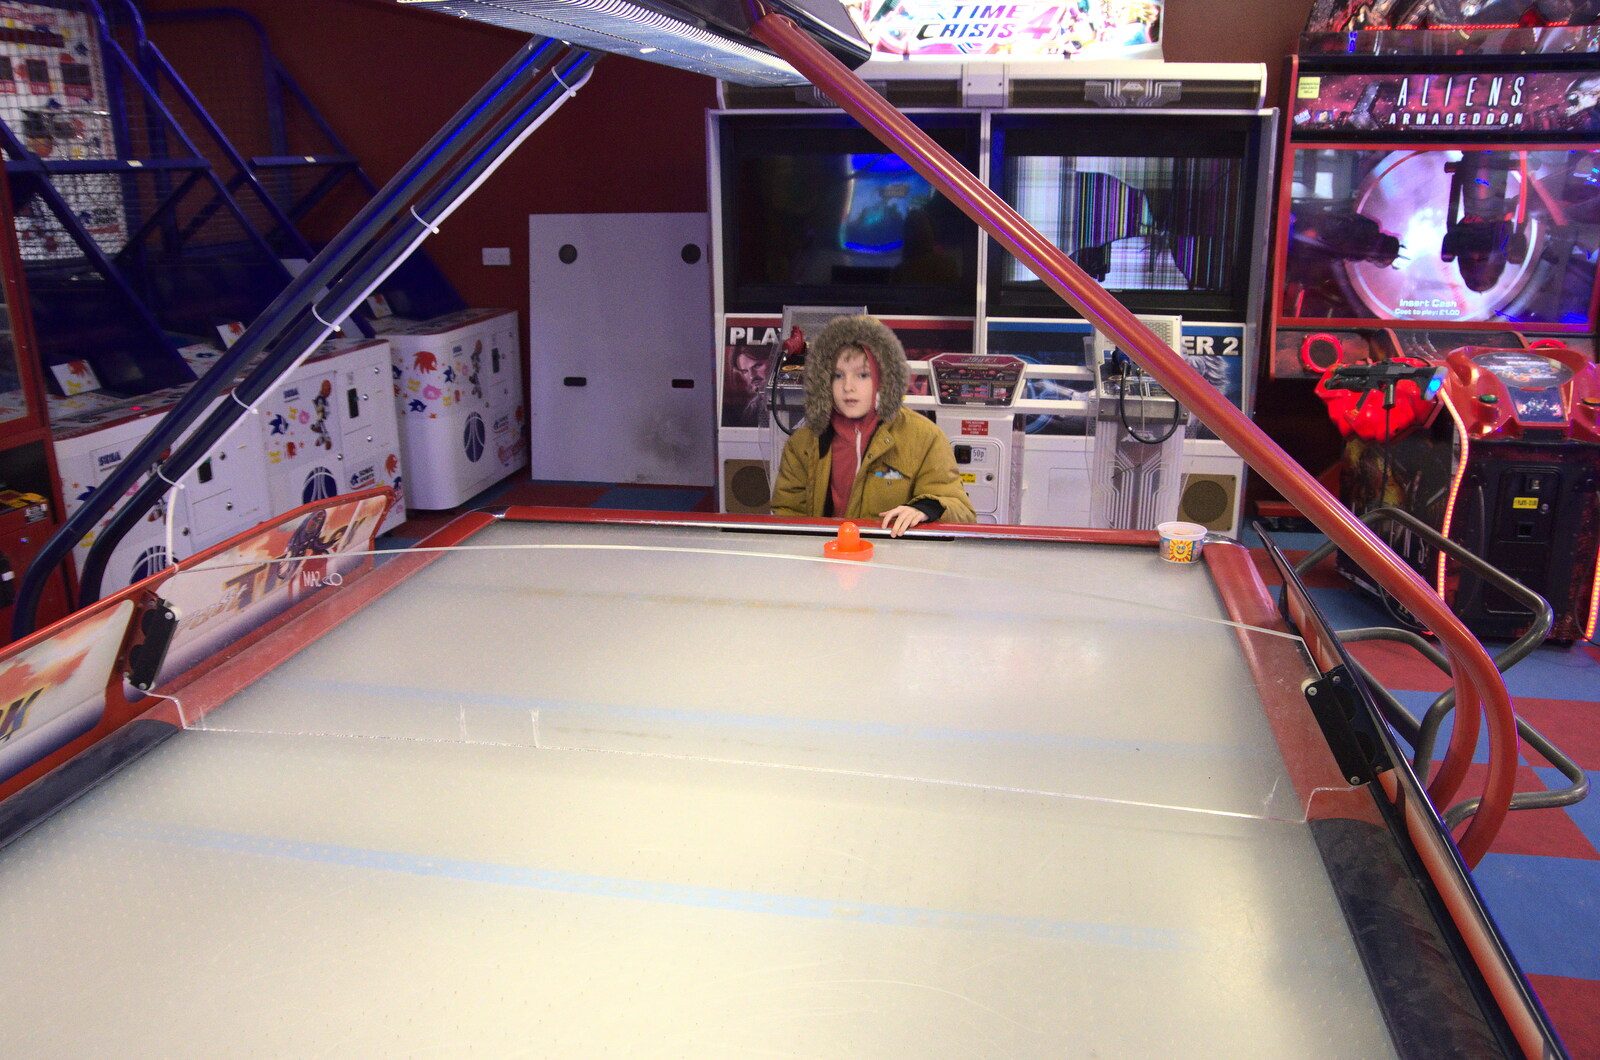 Harry waits for a game of Air Hockey from Genesis at the O2, North Greenwich, London - 24th March 2022